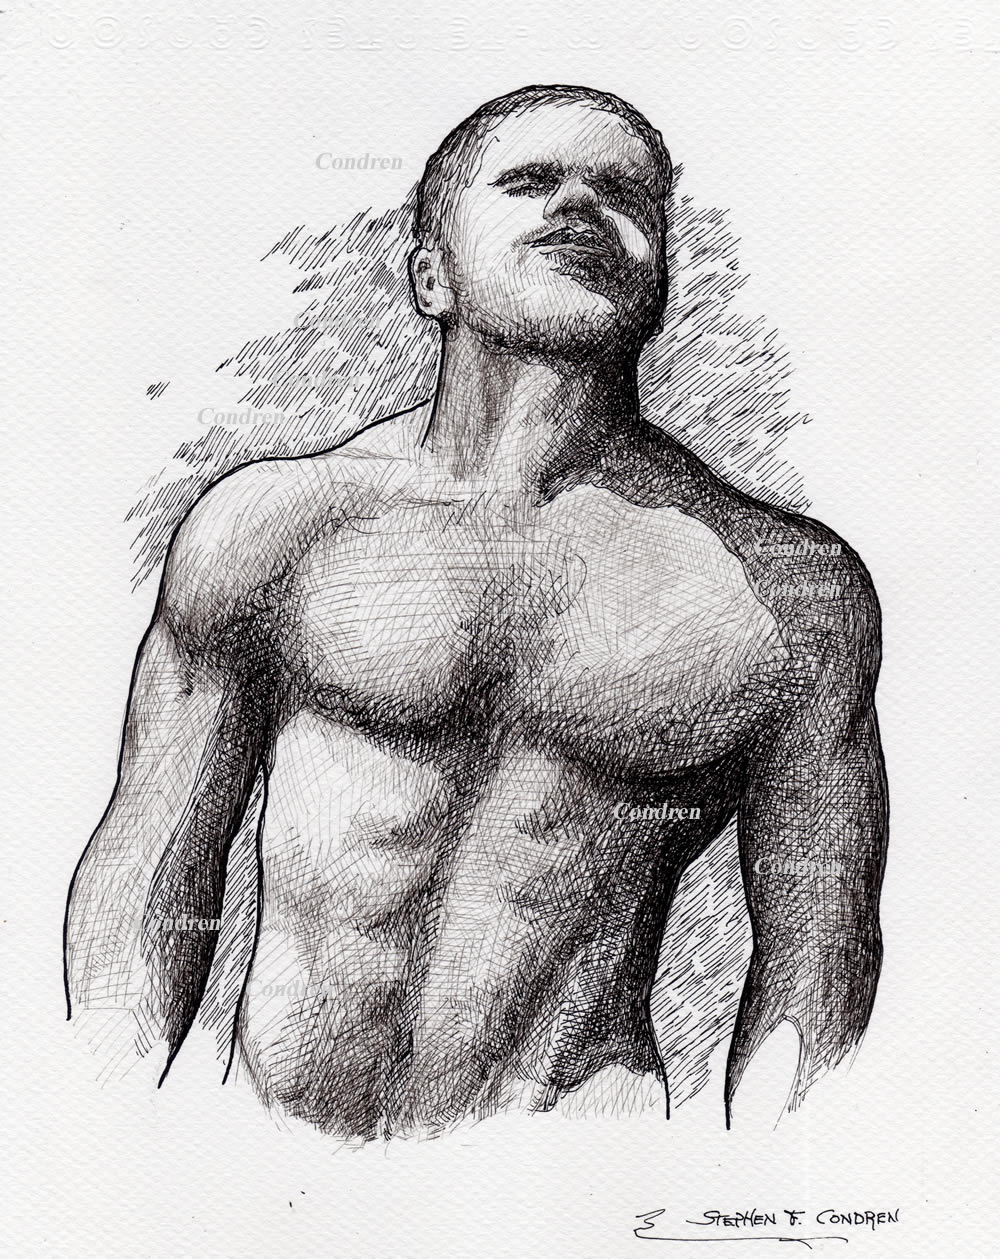 Male figure pen&ink #324Z, or manly physique stylus sketch by artist Stephen F. Condren of Condren Galleries, with gay LGBTQ approved prints, and scans.